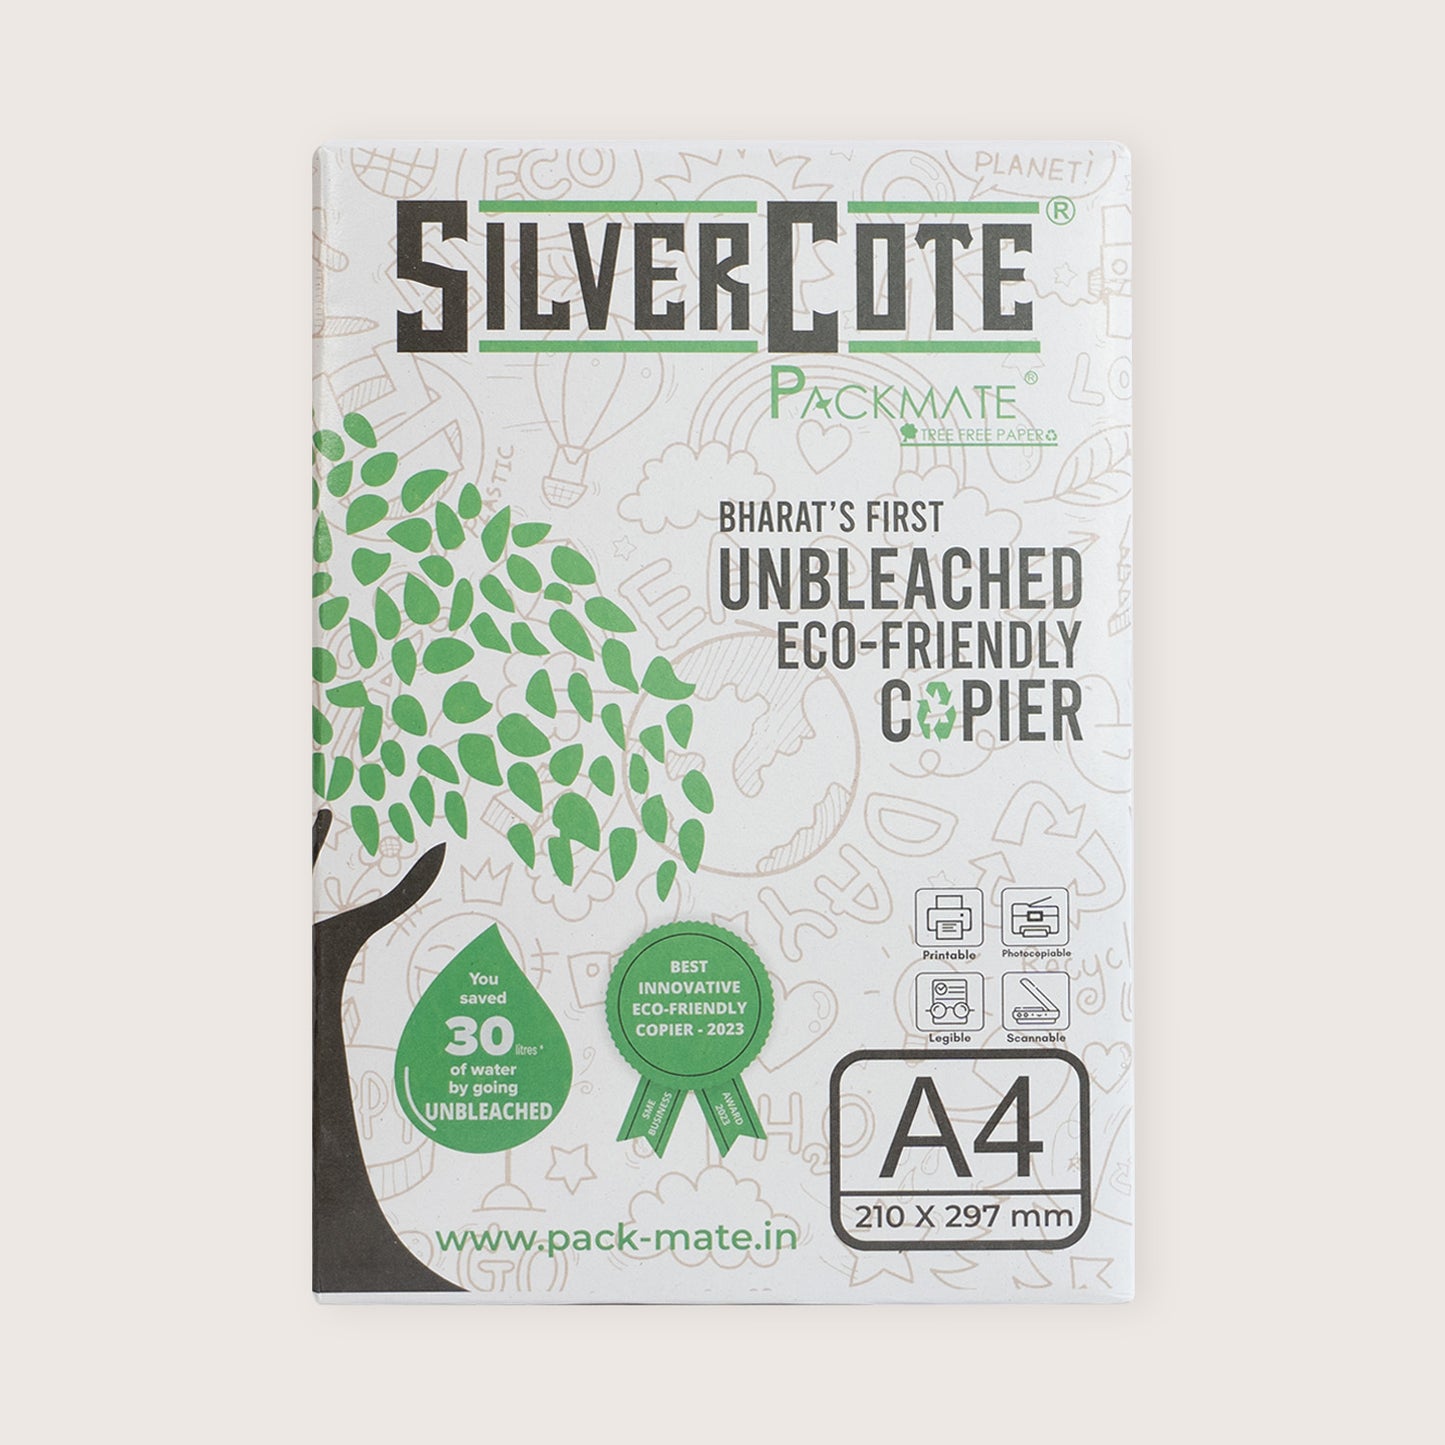 Packmate A4 Copier Combo (1 Silvercote + 1 Gold) Made From 100% Recycled Paper